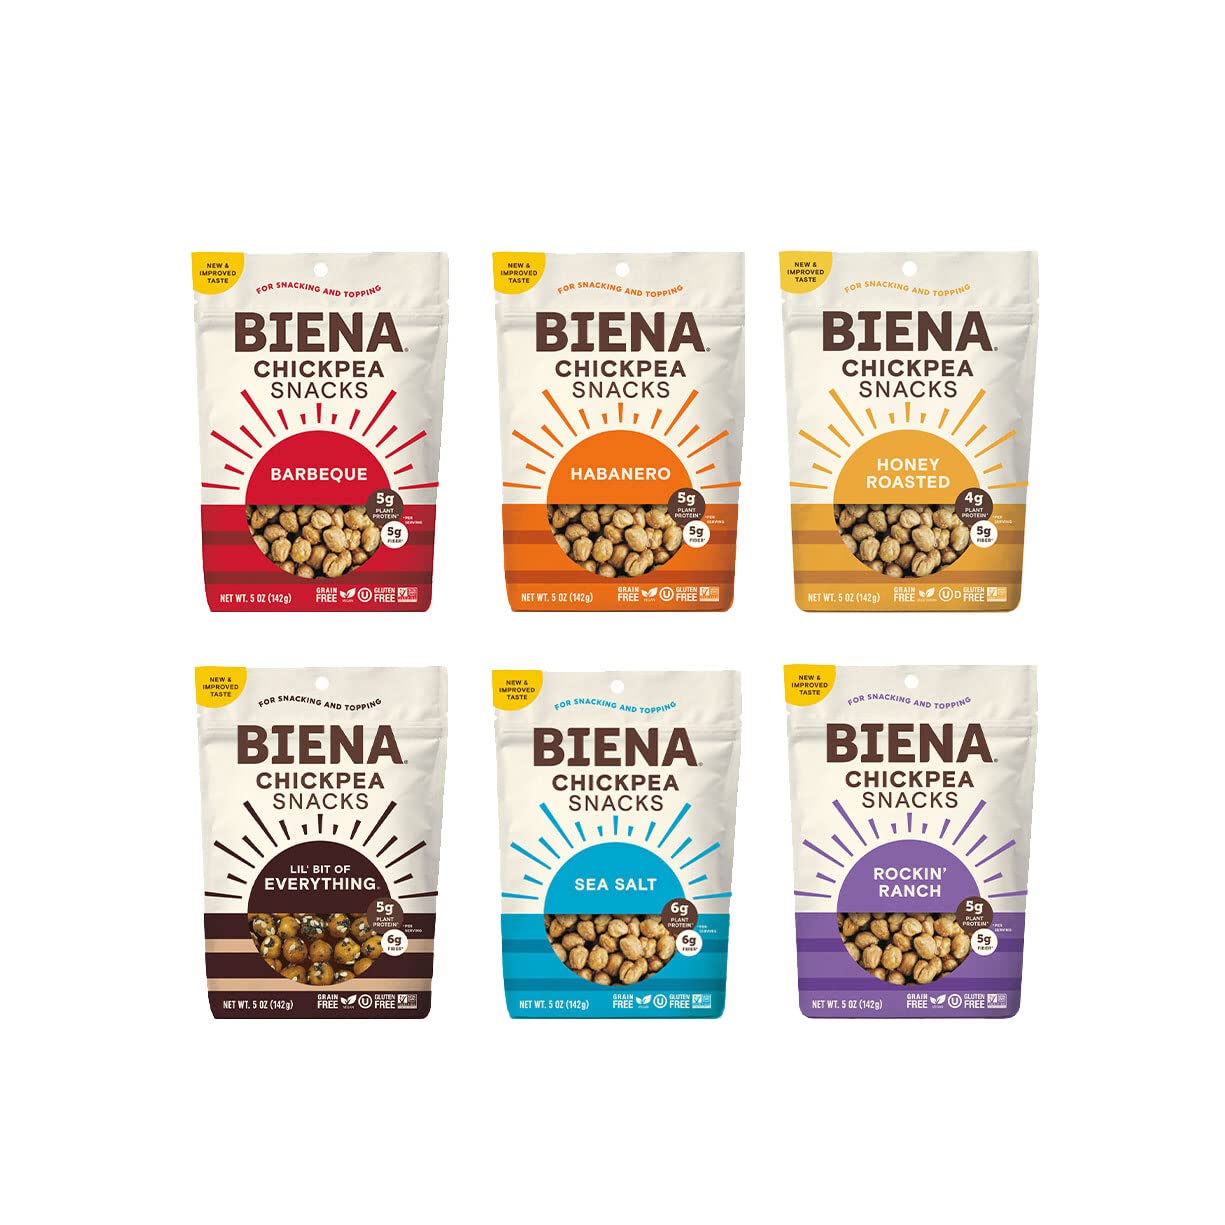 Biena Crispy Roasted Chickpea Snacks, Rockin’ Ranch, High Protein Snacks, High Fiber Snacks, Gluten Free, Plant-Based, Non-GMO, Healthy Snacks for Adults and Kids, 4-Pack 5 Ounce Bags